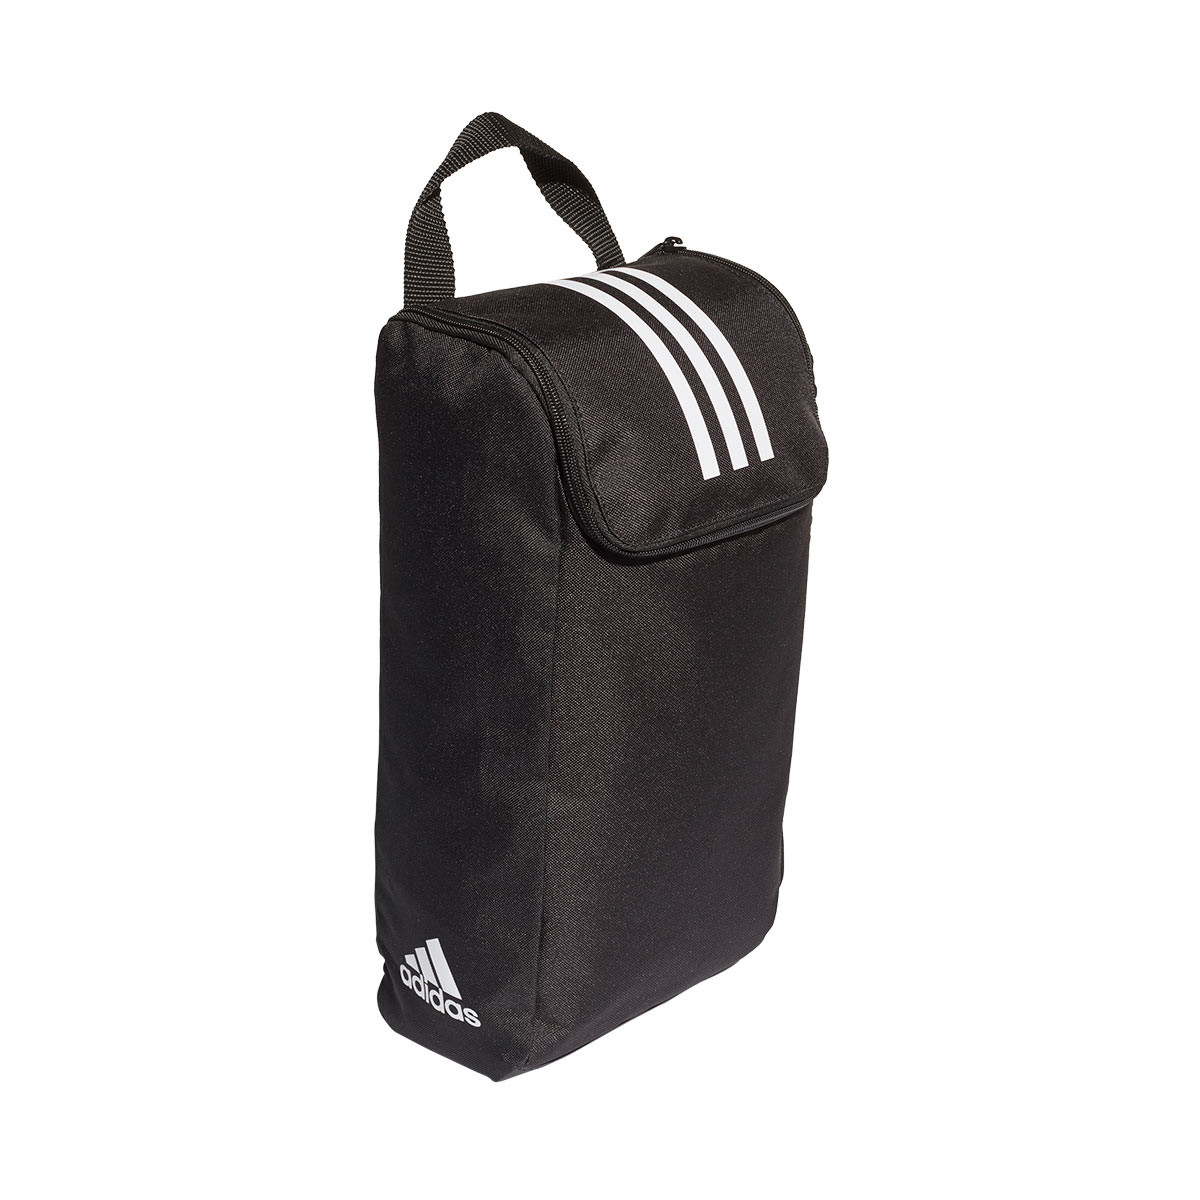 adidas boot bags